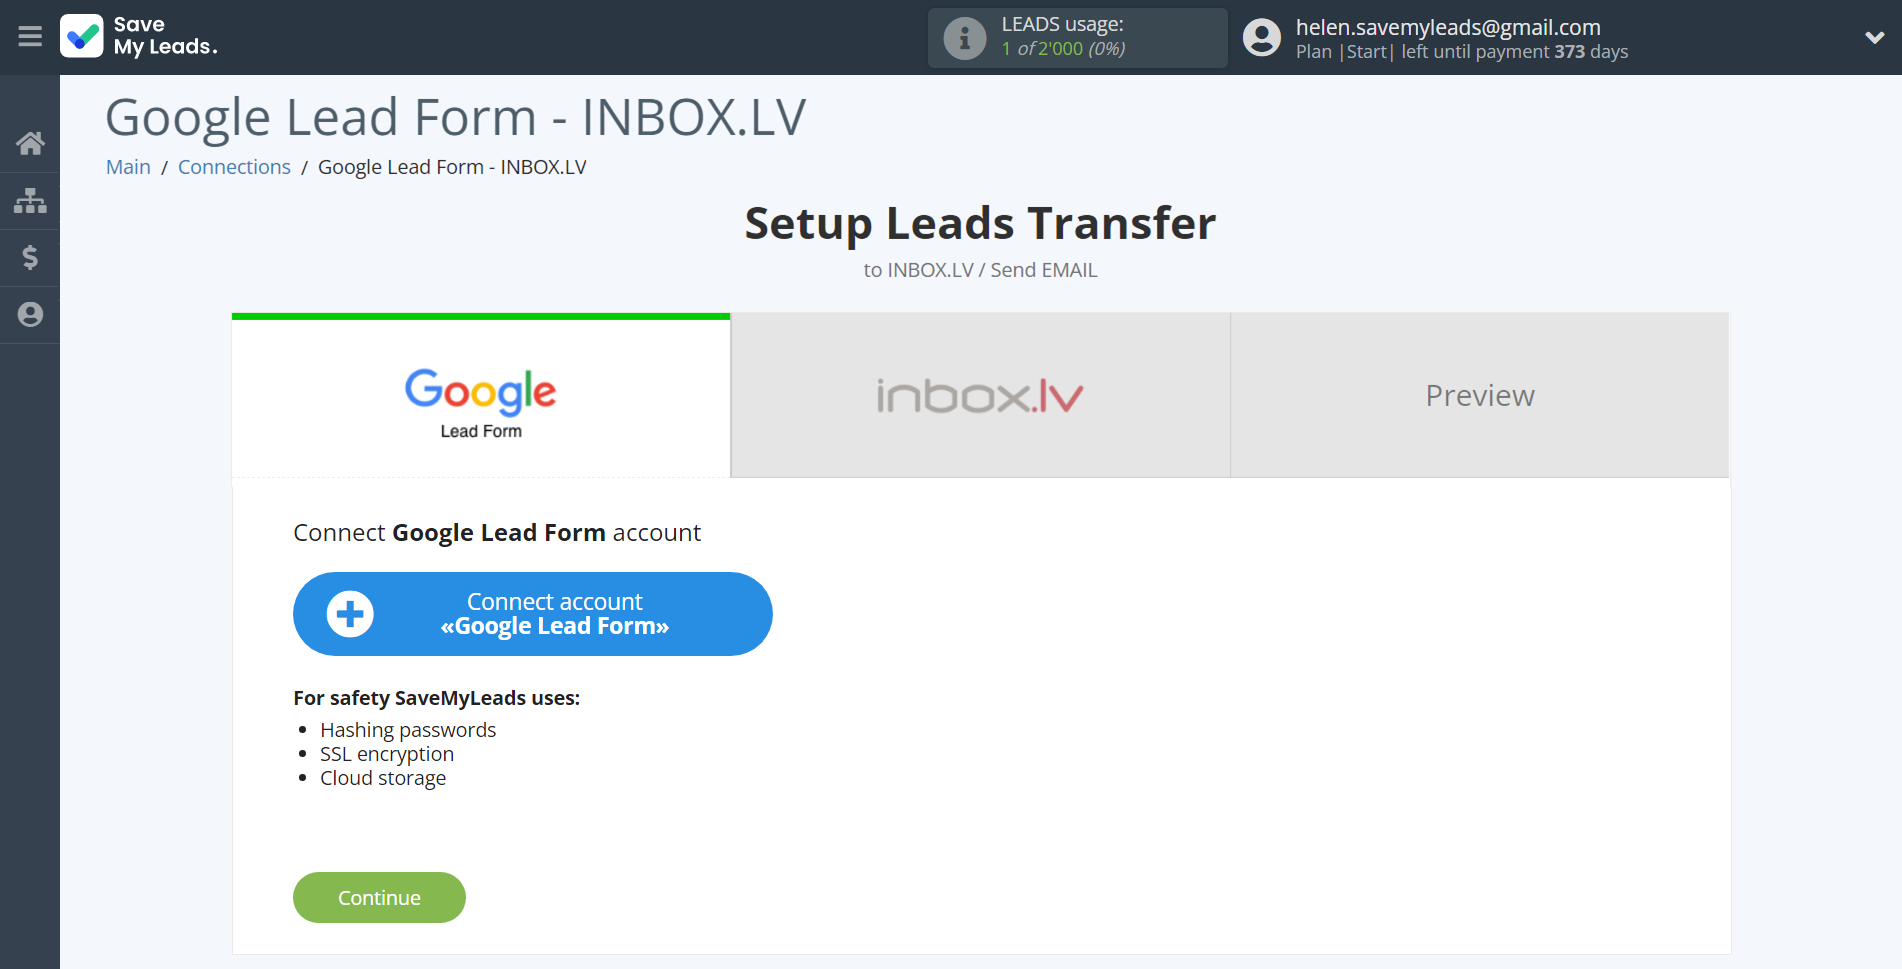 How to Connect Google Lead Form with INBOX.LV | Data Source account